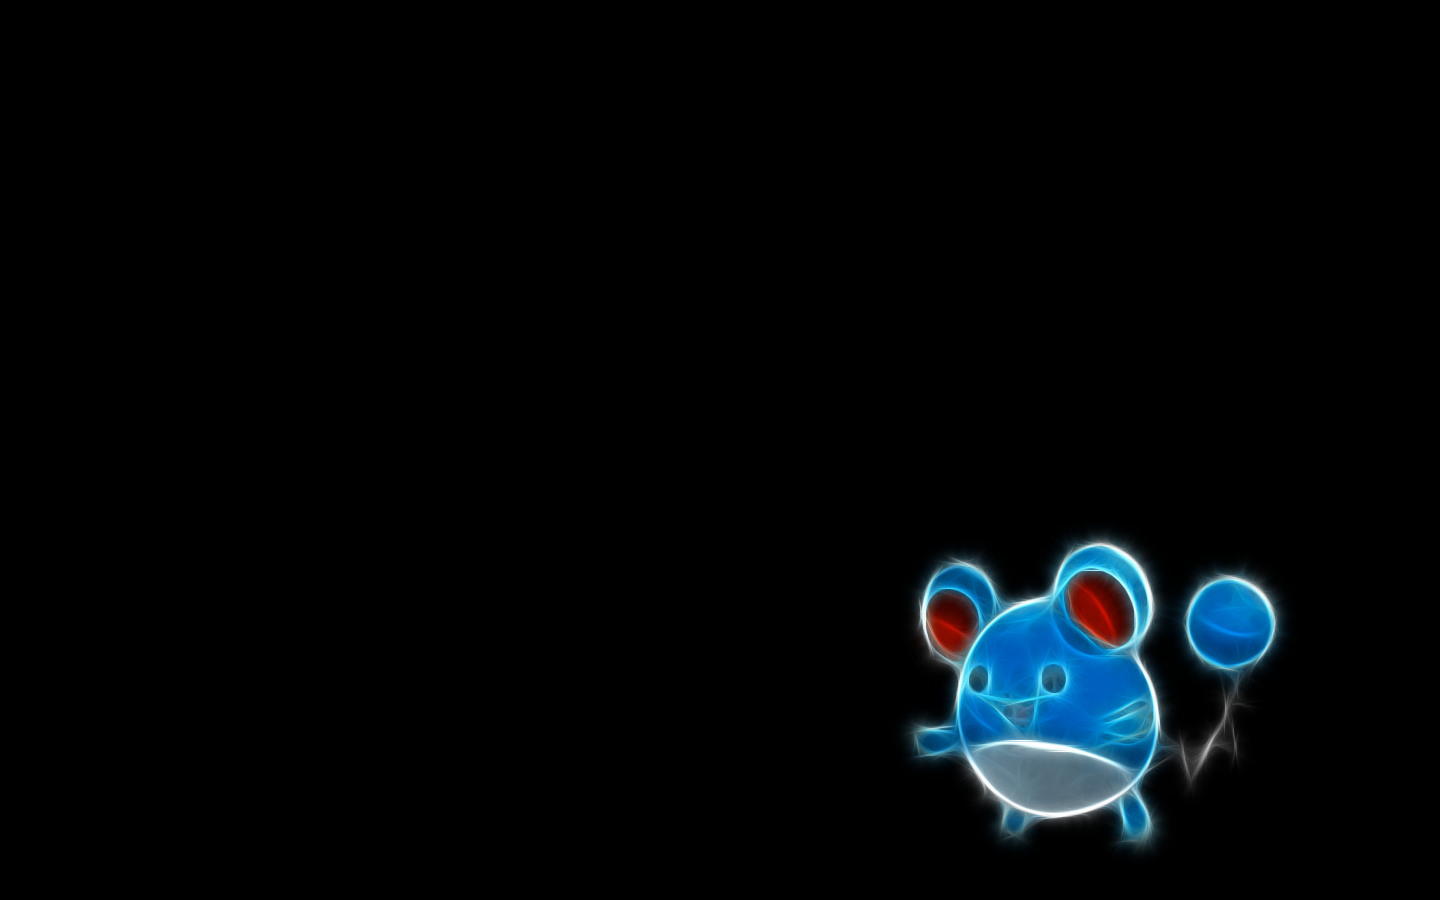 Pokemon Fractalius Black Background HD iPad Wallpaper From Category